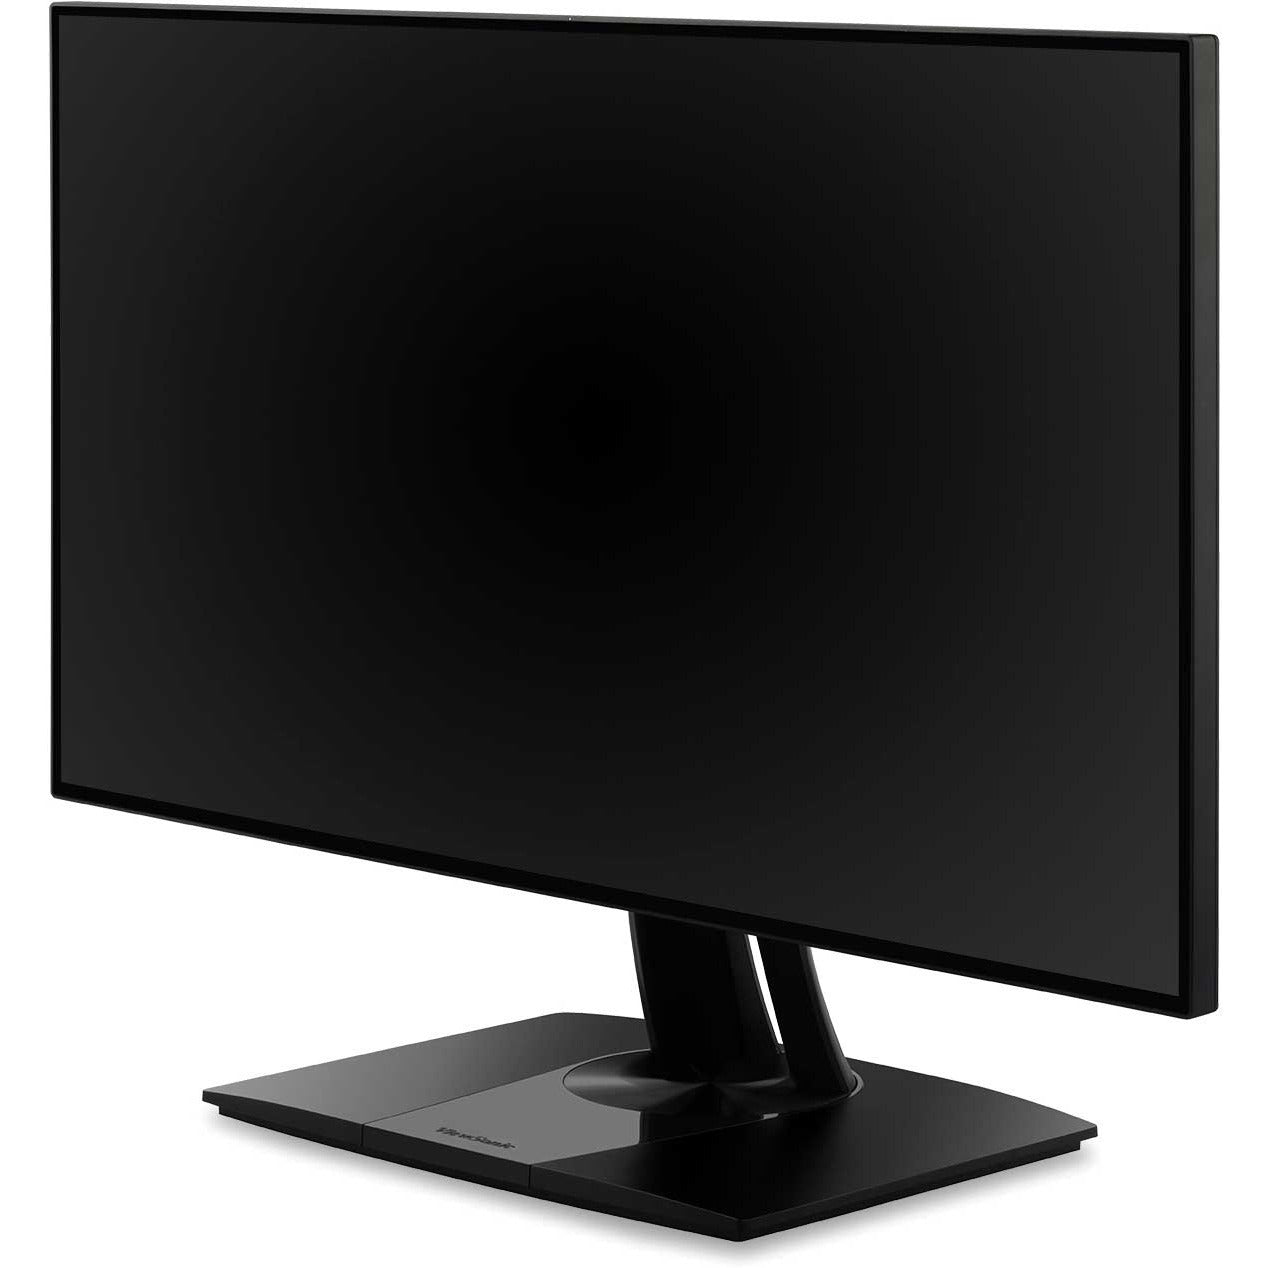 viewsonic-vp2768a-4k-27-inch-premium-ips-4k-monitor-with-advanced-ergonomics-colorpro-100%-srgb-rec-709-14-bit-3d-lut-eye-care-hdmi-usb-c-displayport-for-professional-home-and-office-colorpro-vp2768a-4k-4k-uhd-monitor-with-ergonomics-usb-c_vewvp2768a4k - 3